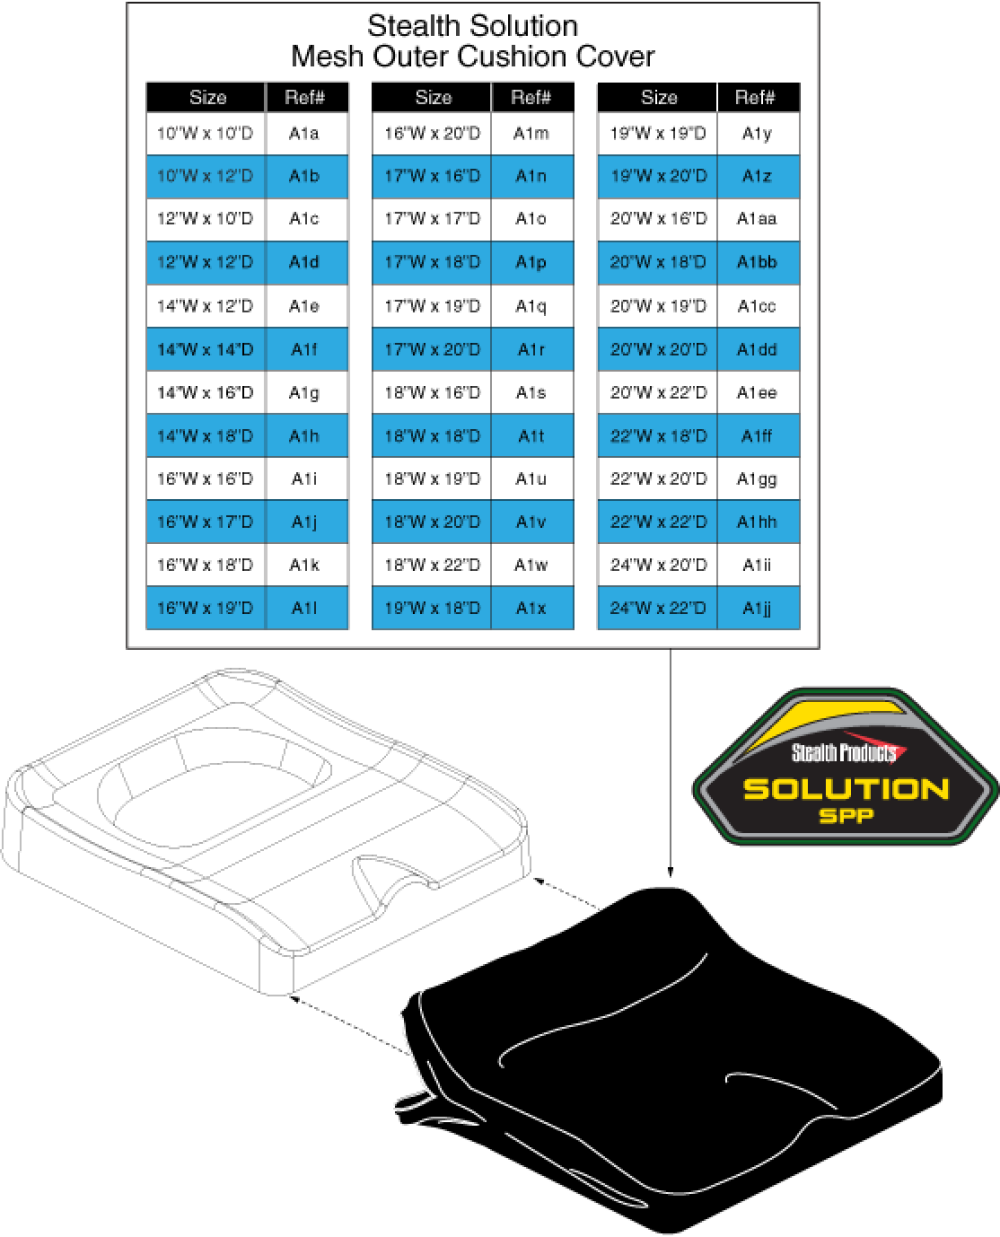 Stealth Solution Mesh Outer Cushion Cover parts diagram